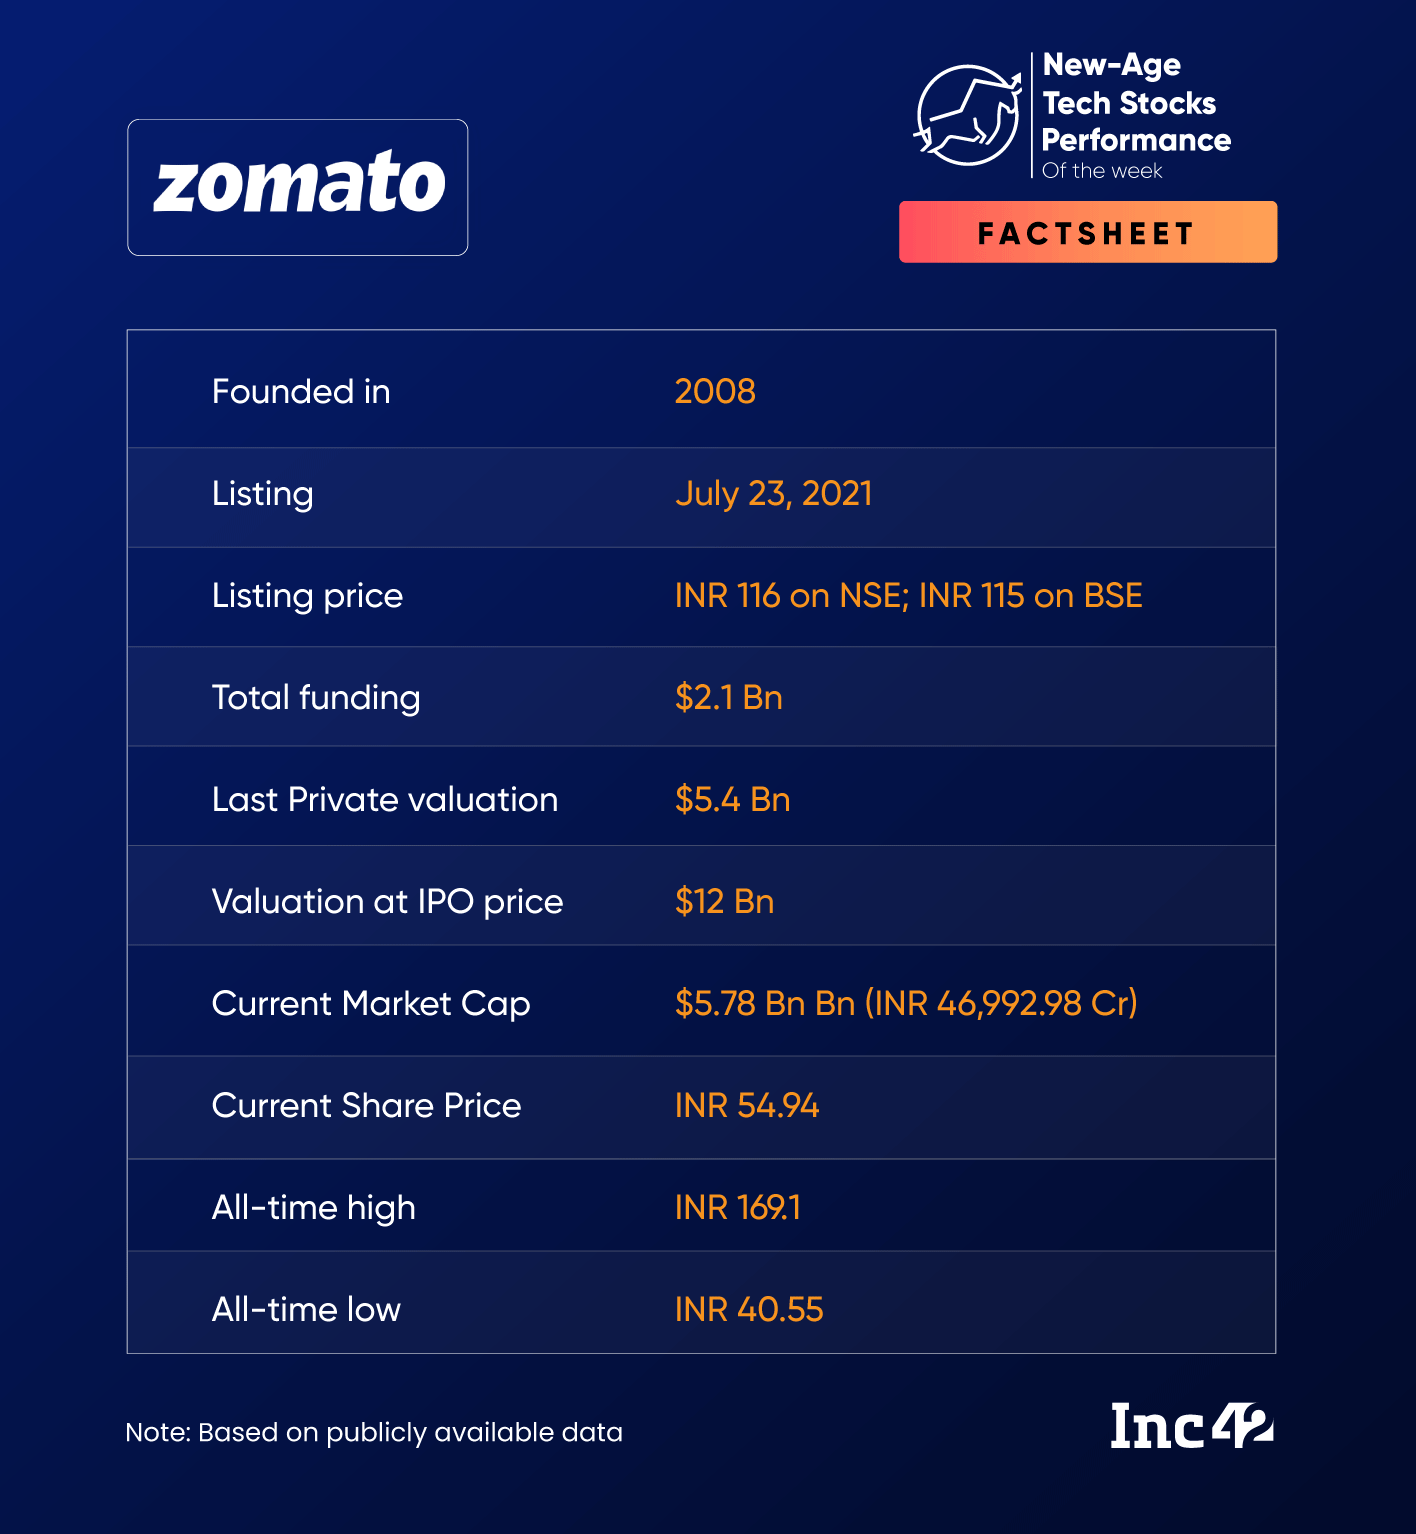 Zomato Manages To Gain Amid Pressure